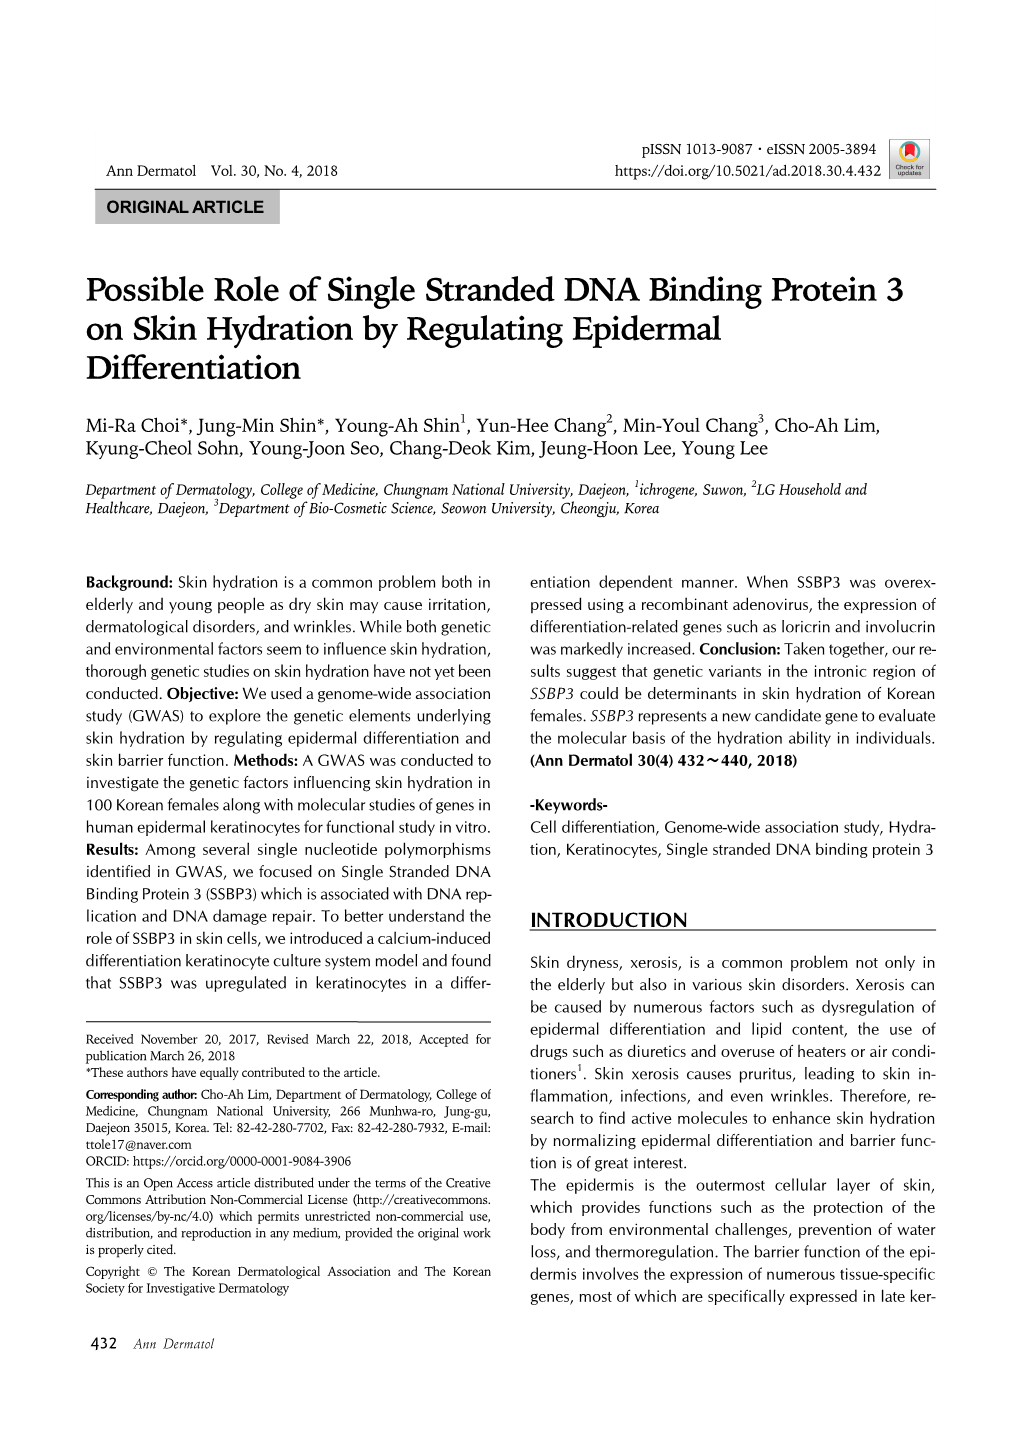 Possible Role of Single Stranded DNA Binding Protein 3 on Skin Hydration by Regulating Epidermal Differentiation